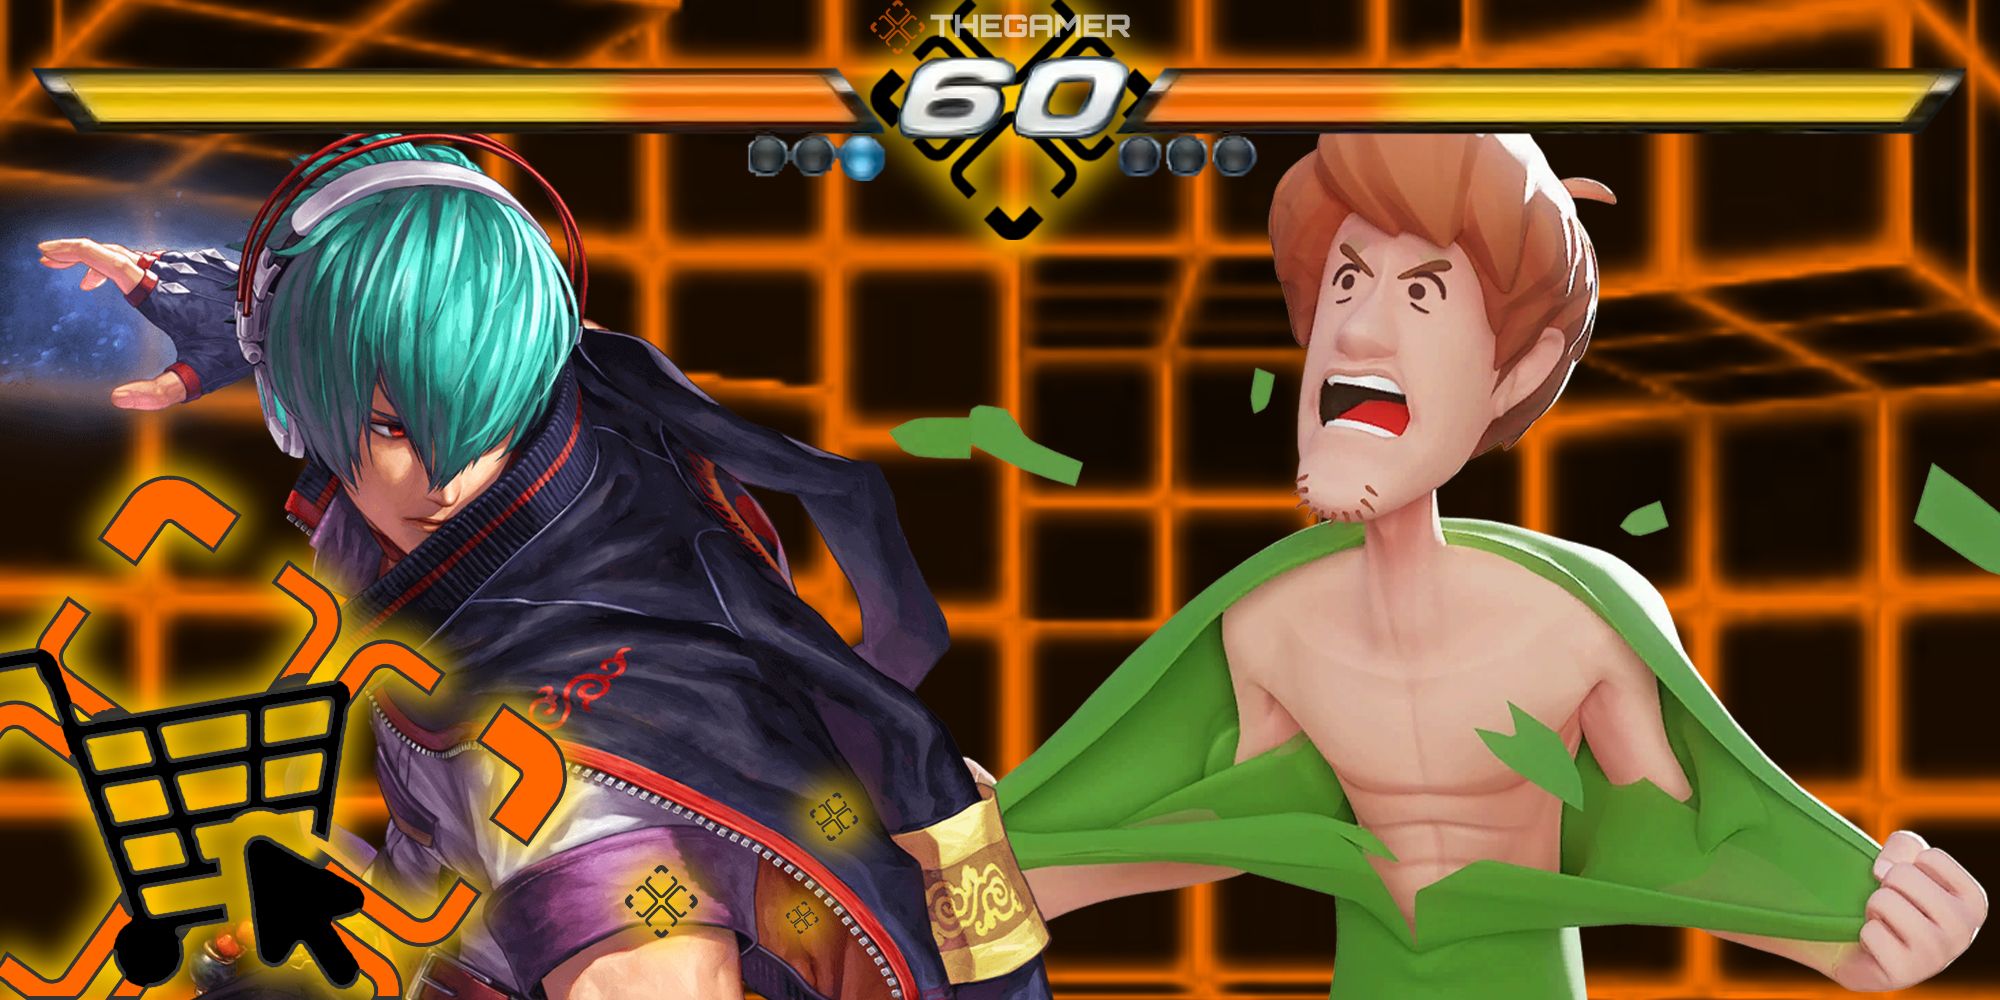 Shun'ei from KOF15 and Shaggy from MultiVersus face off in a black and orange grid arena. The Gamer Shopping Cart icon is in the lower-left corner. Custom image for TG.